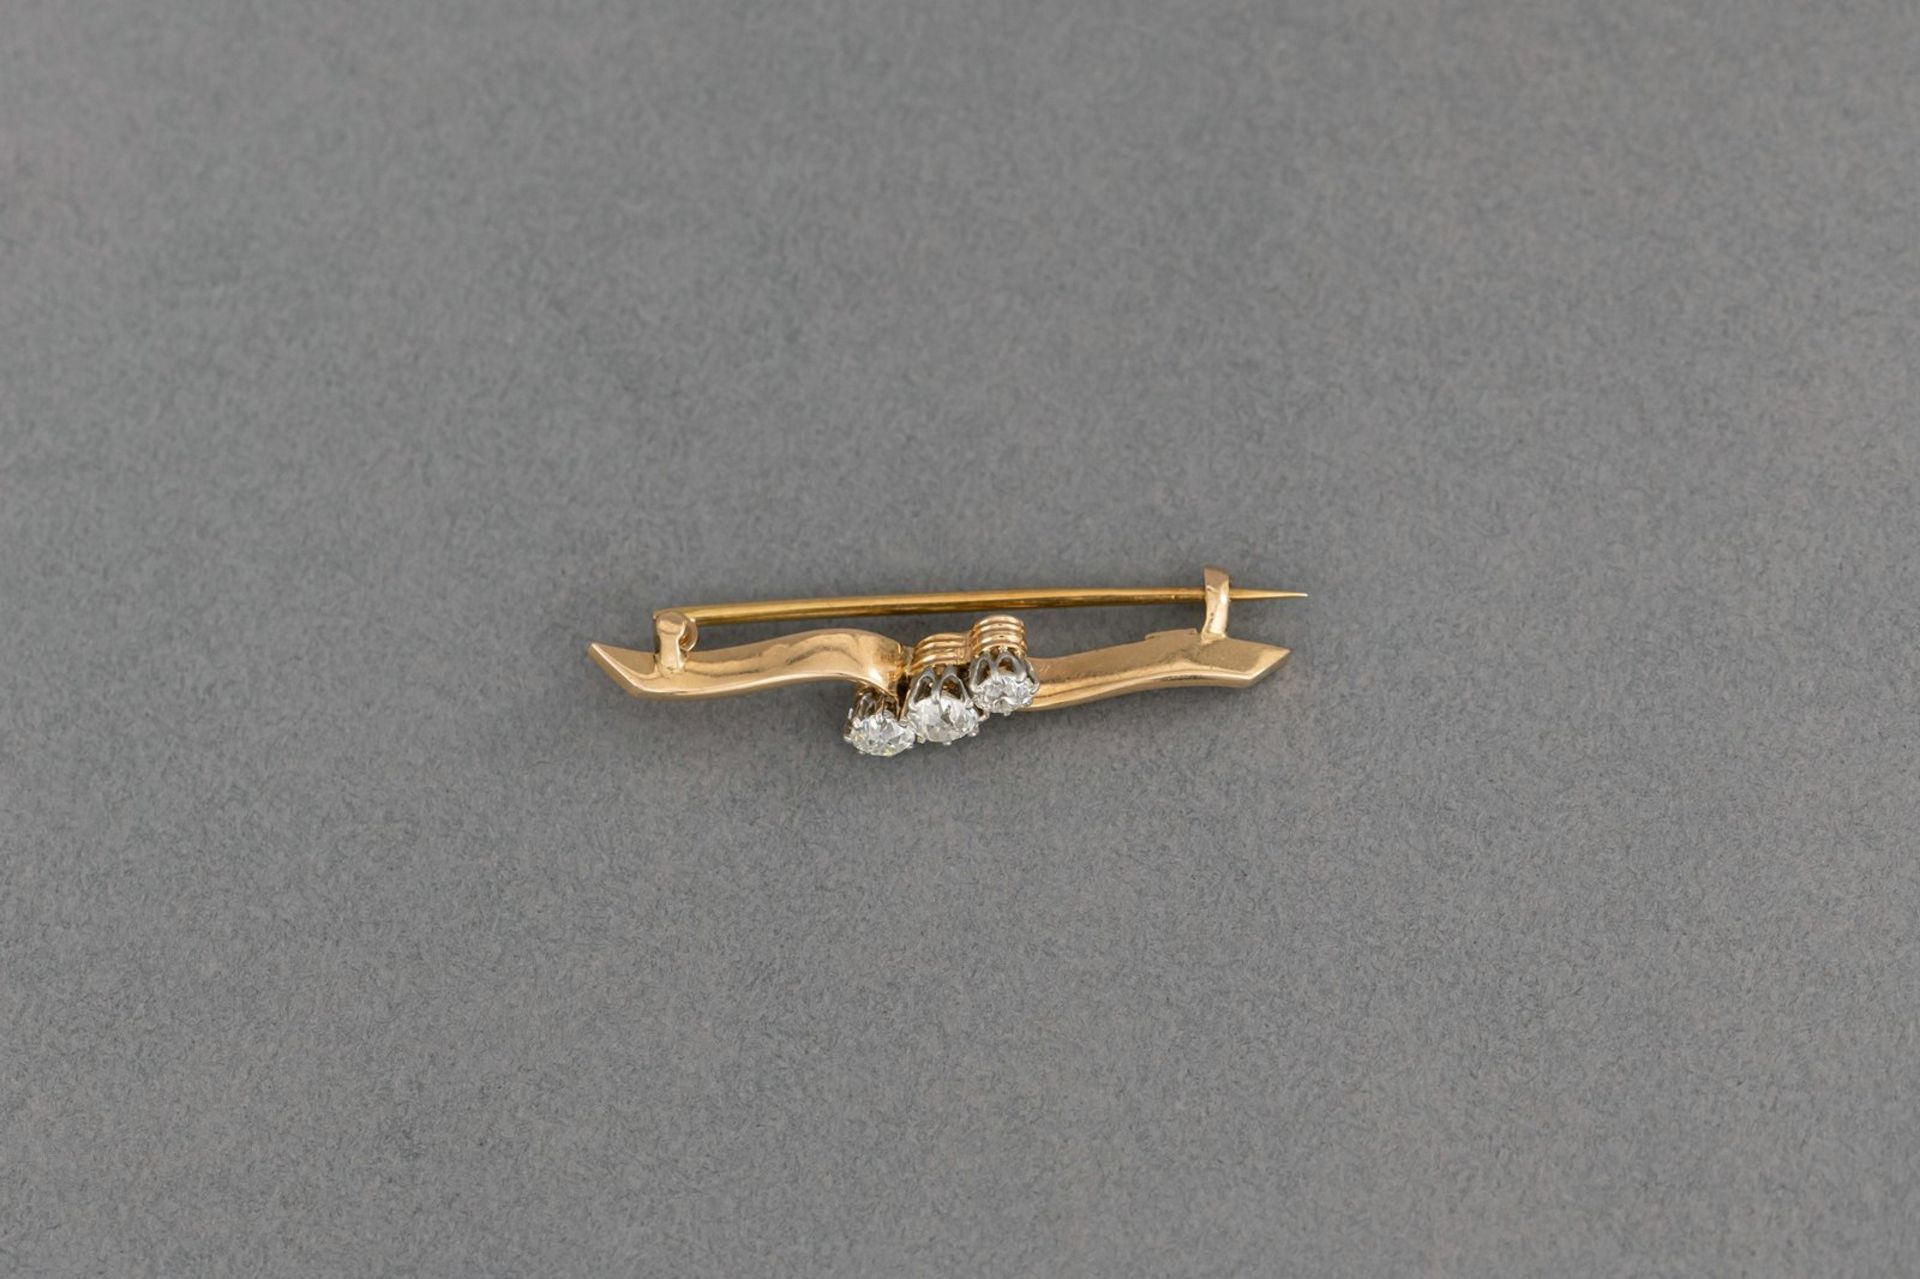 A DIAMOND BROOCH, EARLY 20TH CT. - Image 4 of 6